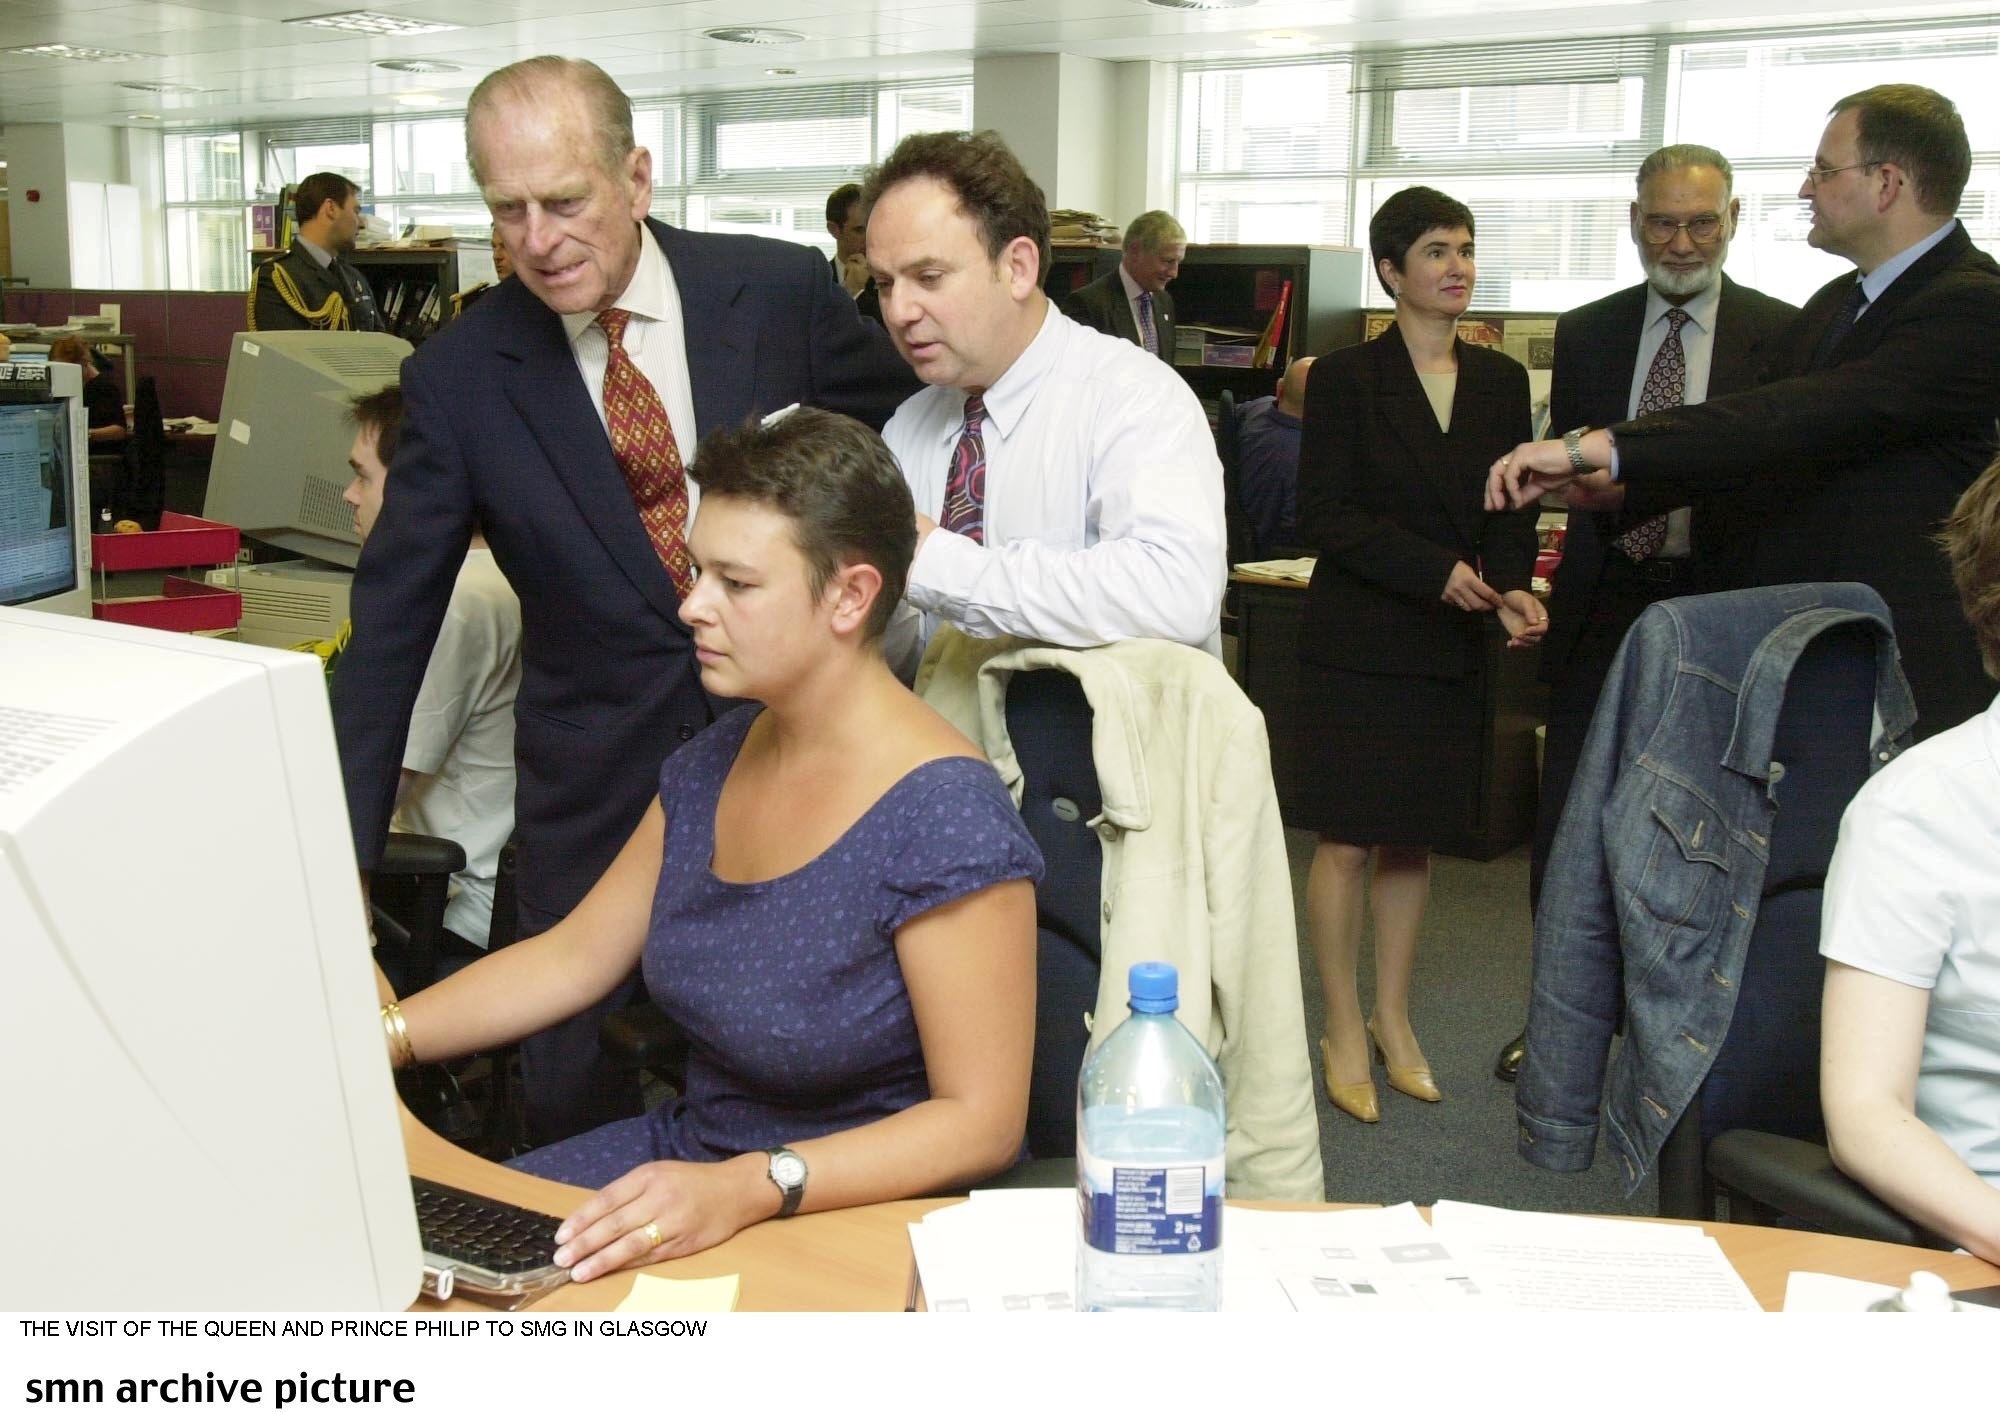 In July 2001, Prince Philip and the Queen visited the Glasgow Times and Herald offices.